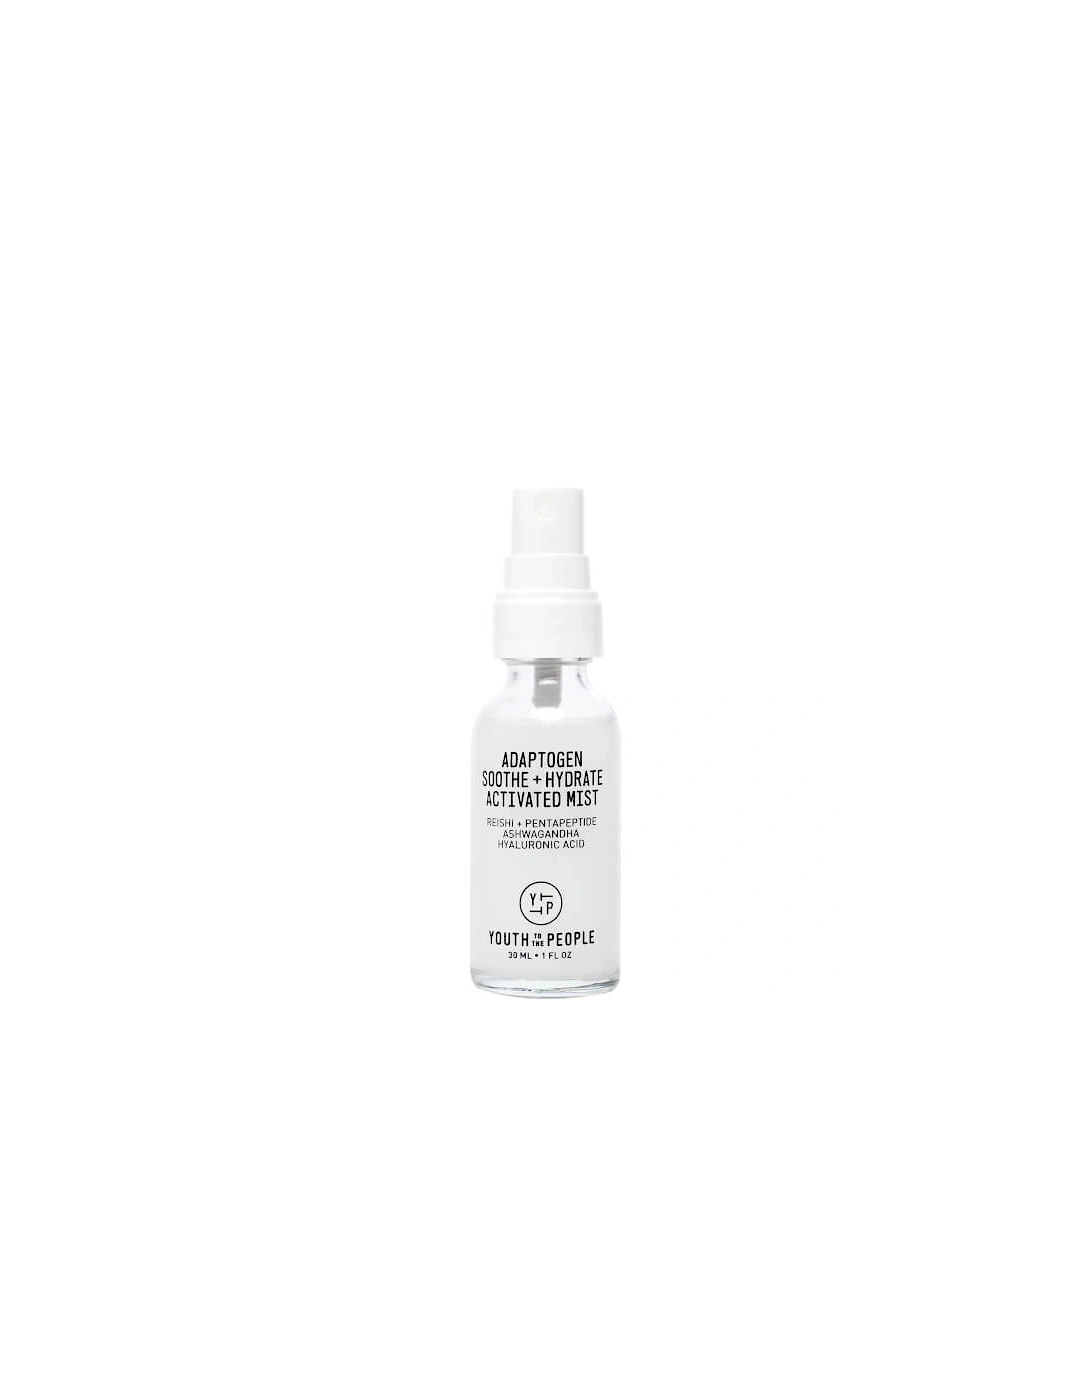 Adaptogen Soothe and Hydrate Activated Mist - 30ml, 2 of 1